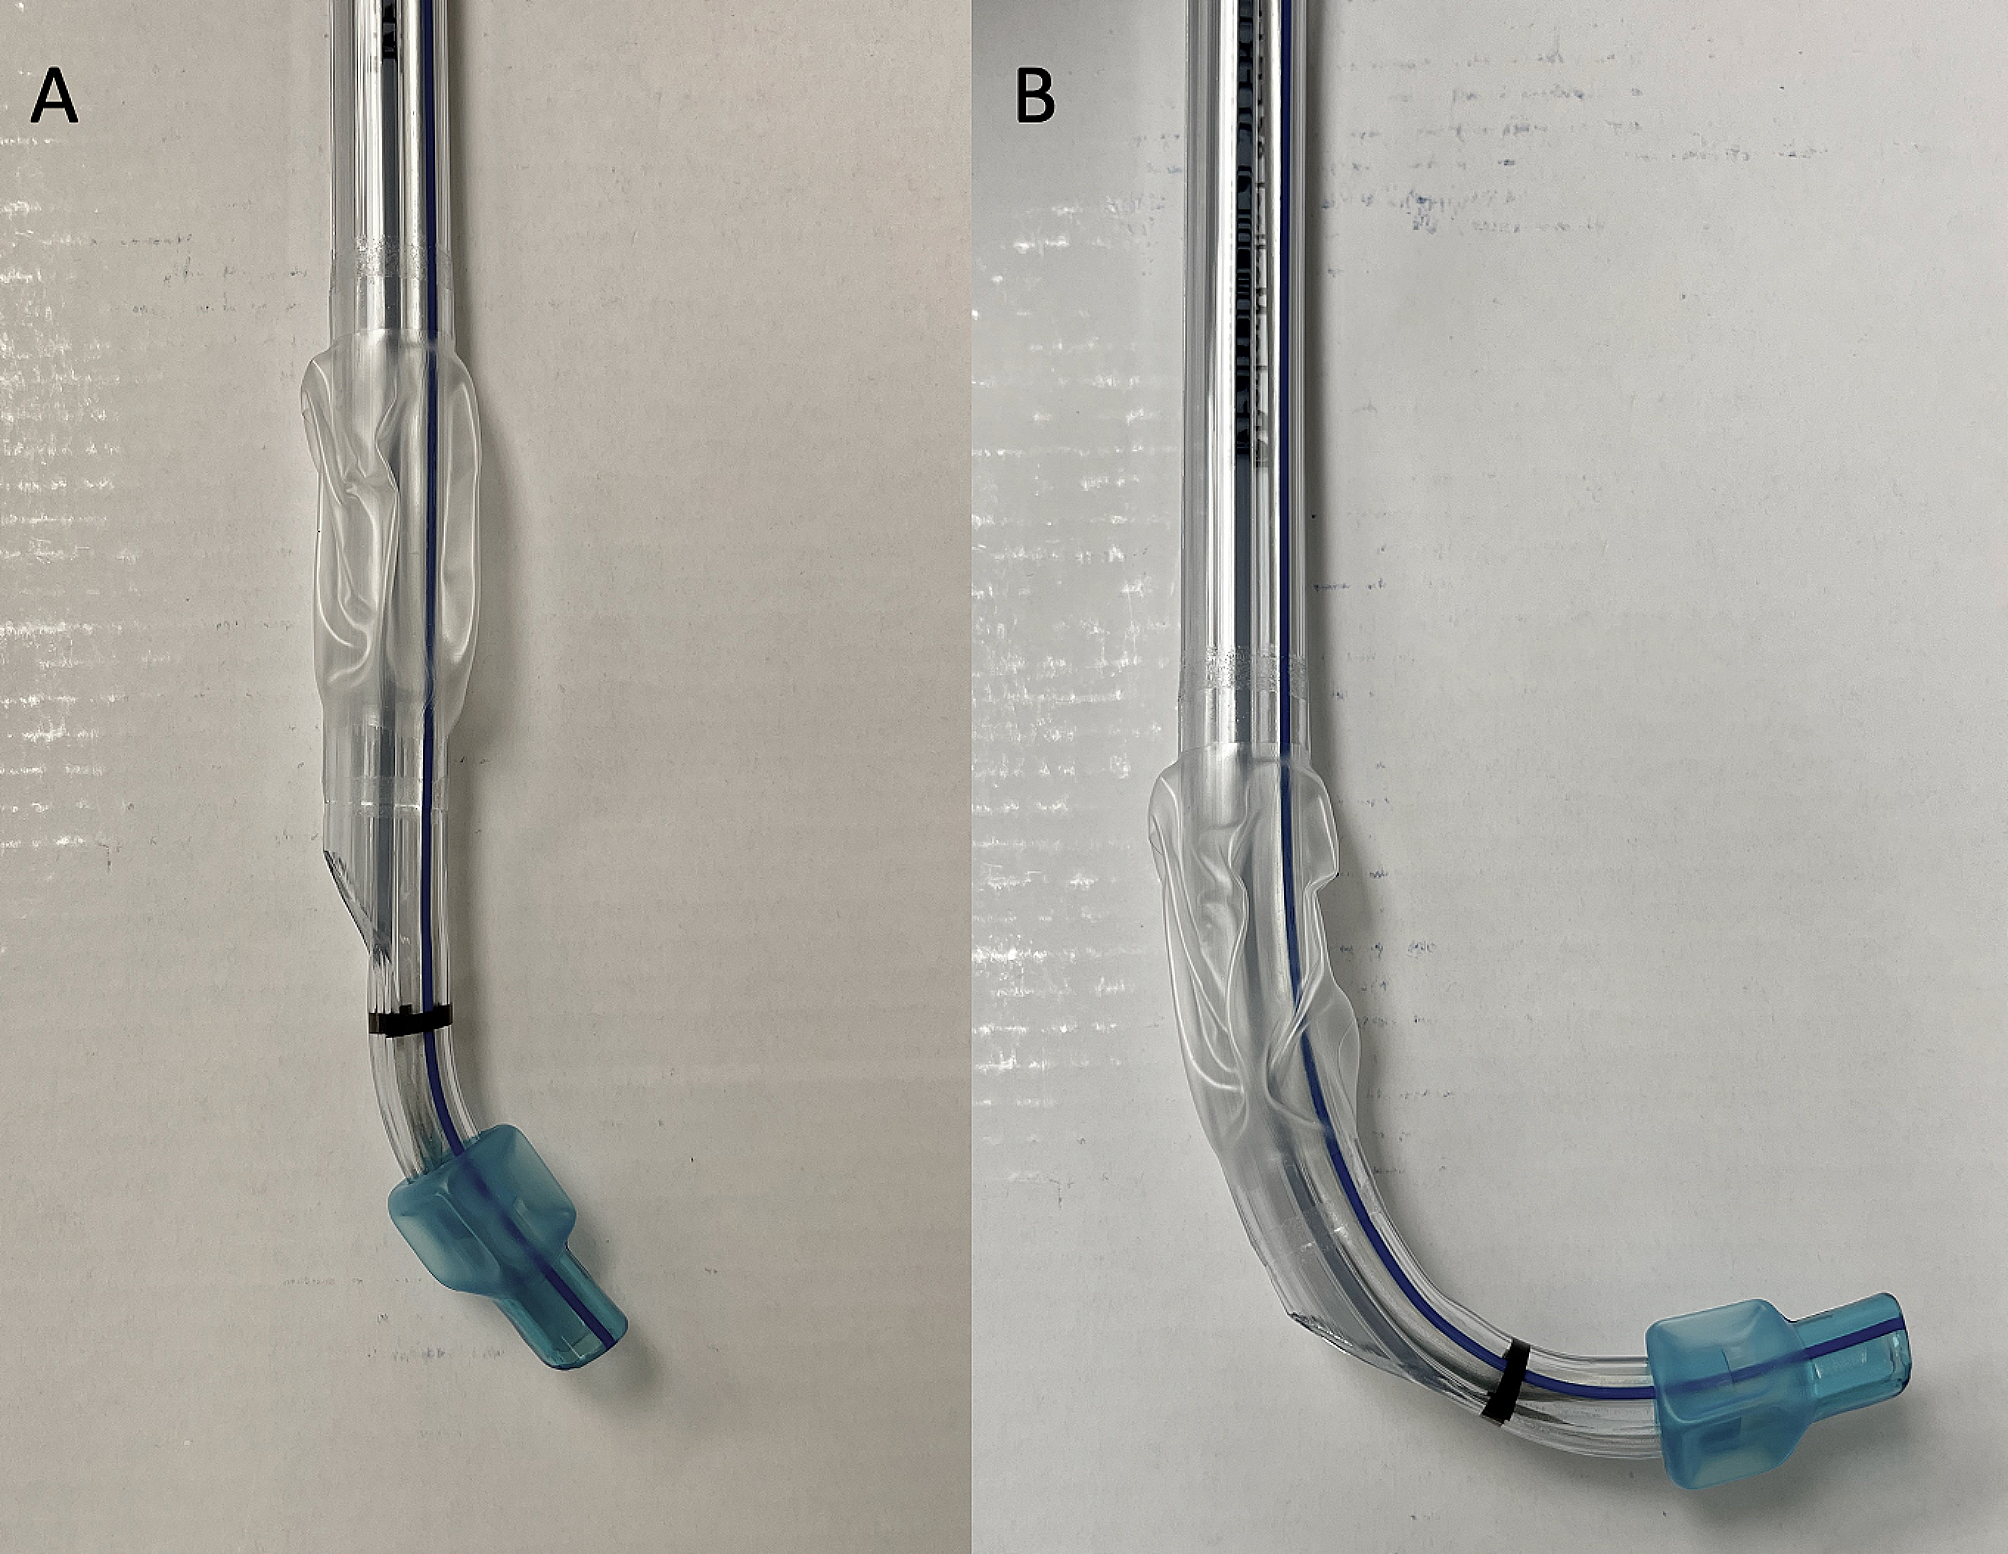 A novel combined approach to placement of a double lumen endobronchial tube using a video laryngoscope and fiberoptic bronchoscope: a retrospective chart review